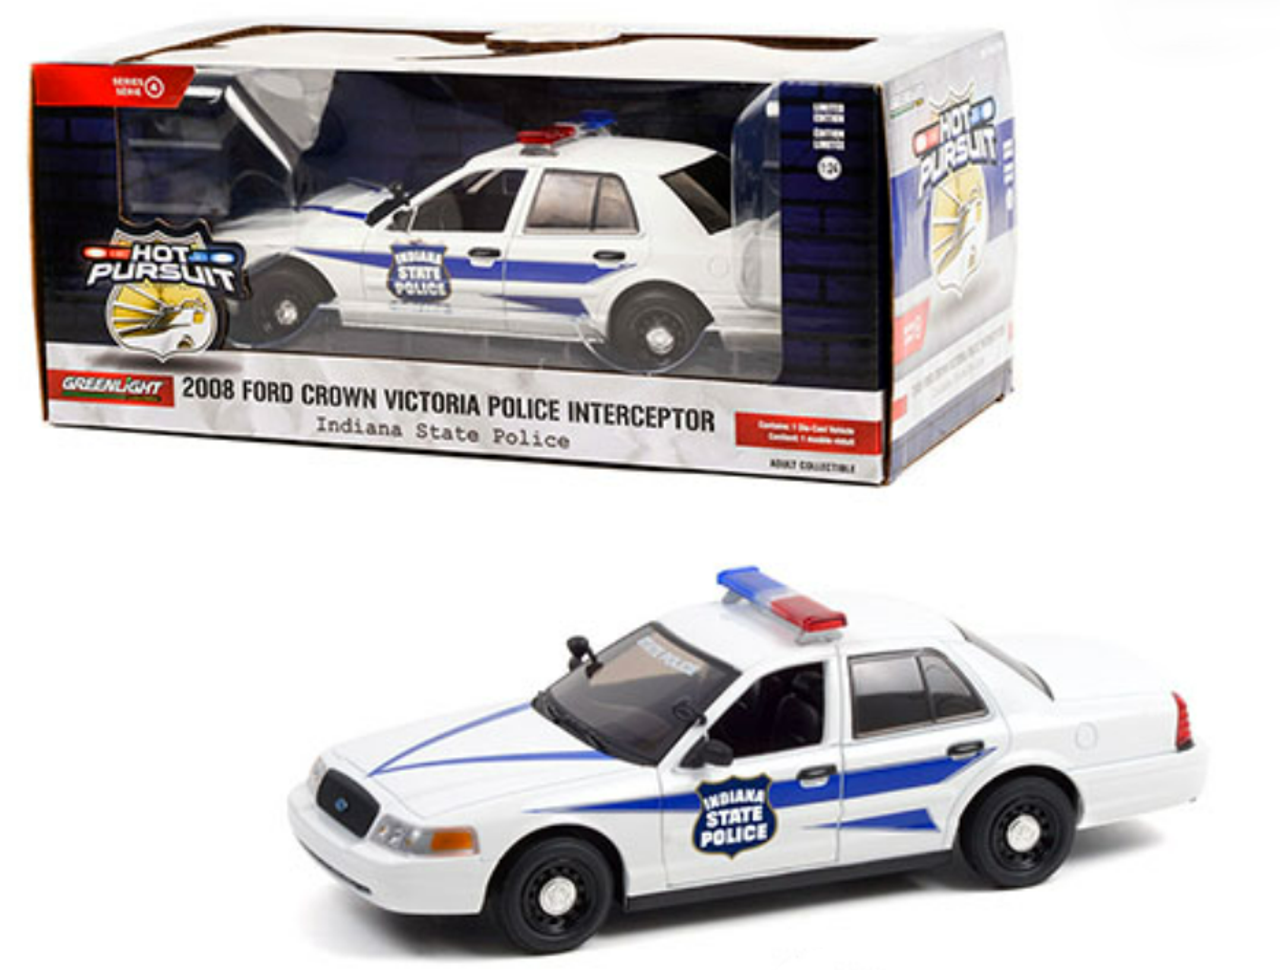 1/24 Greenlight Hot Pursuit 2008 Ford Crown Victoria Police Interceptor Indiana State Police (White) Diecast Car Model